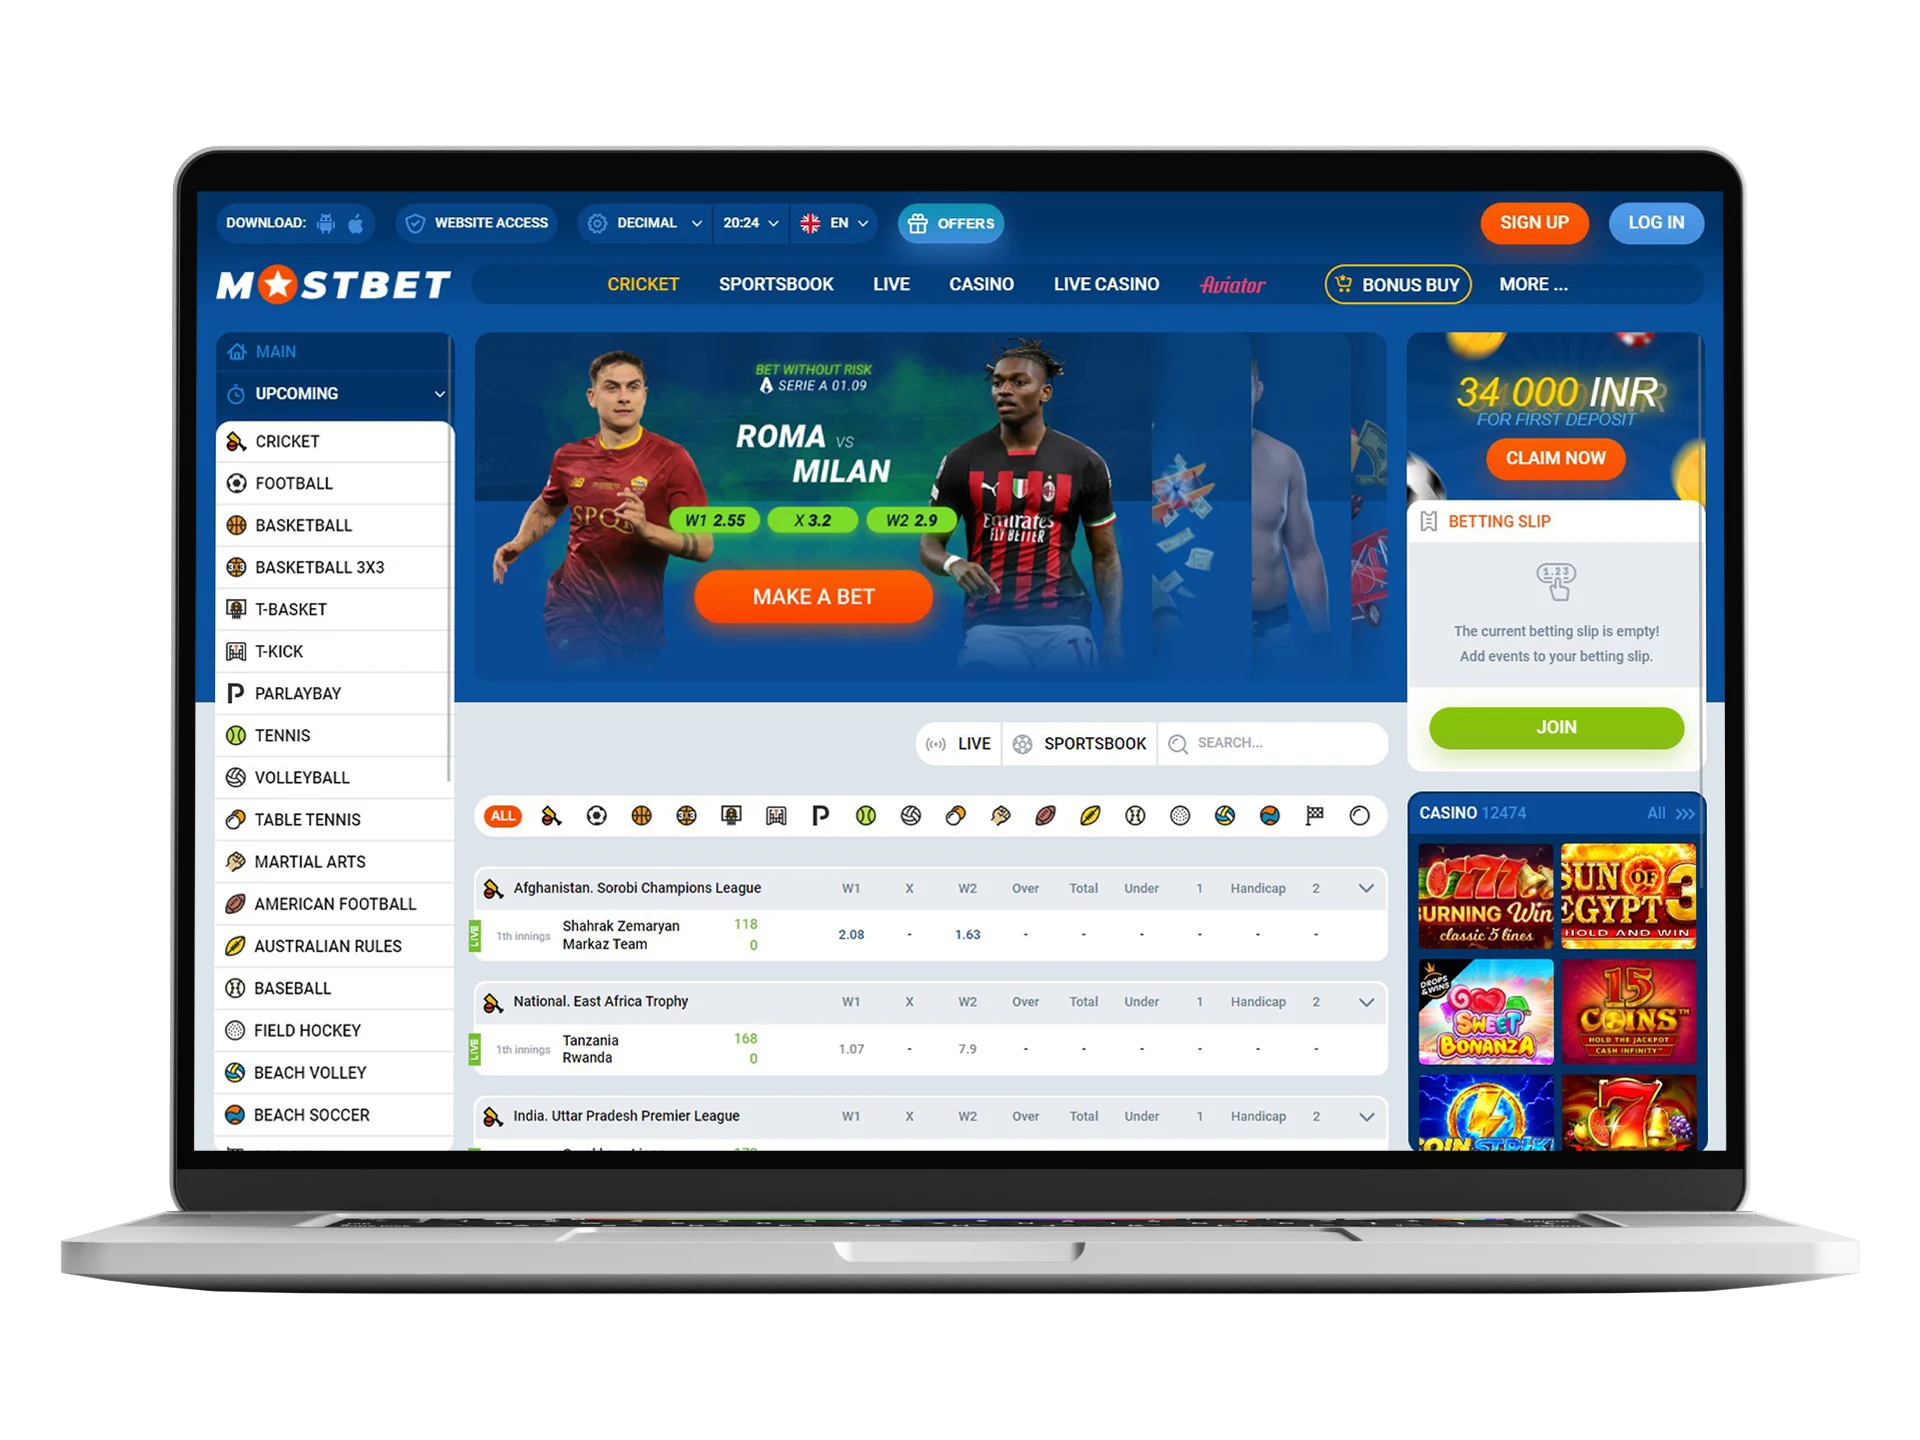 At Mostbet you will find all live betting opportunities on cricket tournaments and matches.